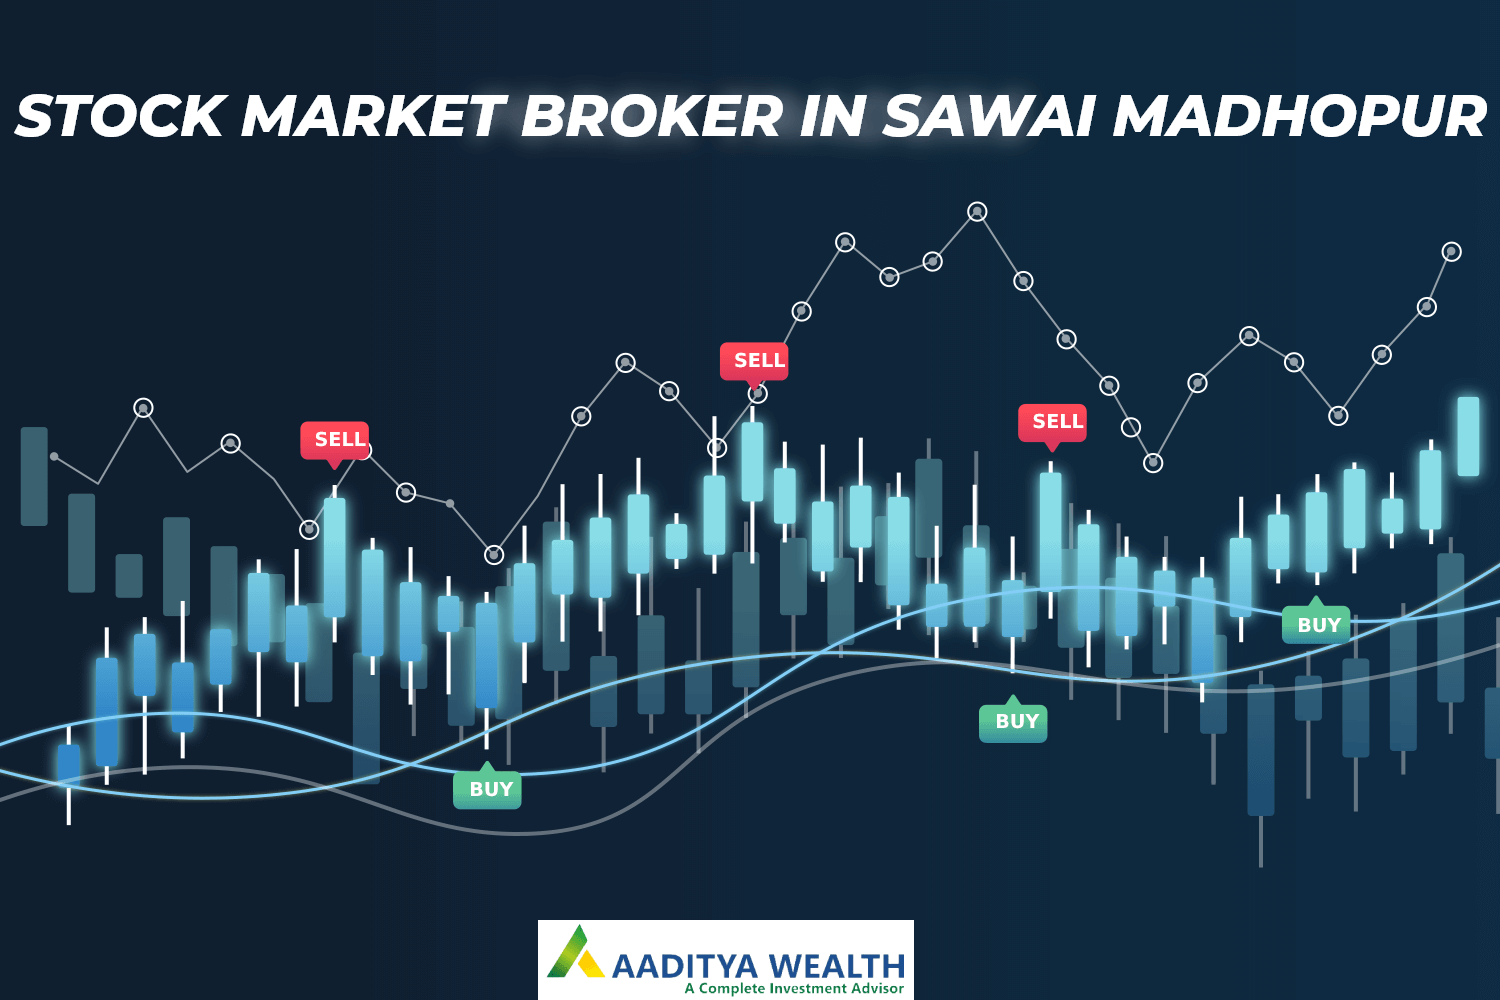 Are you looking for the Best & Top Stock Market Broker in Sawai Madhopur?